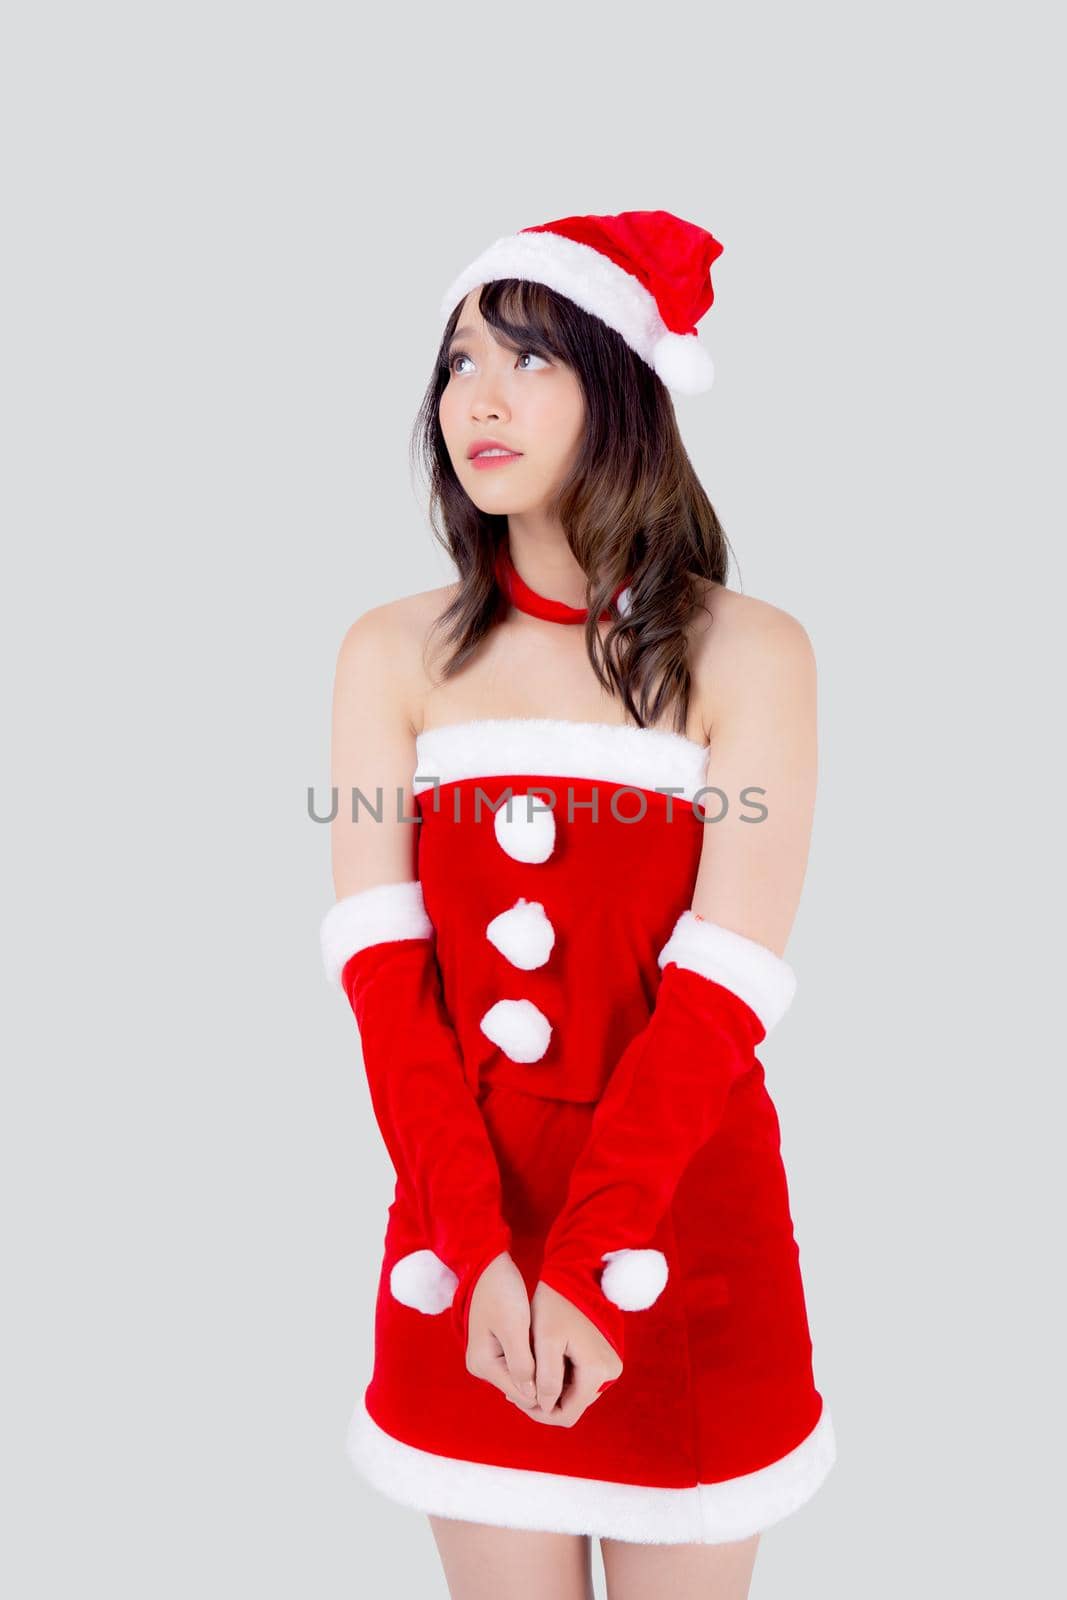 Beautiful portrait young asian woman Santa costume wear hat smiling and thinking in holiday xmas, beauty model asia girl cheerful and happiness celebrating in Christmas isolated on white background.